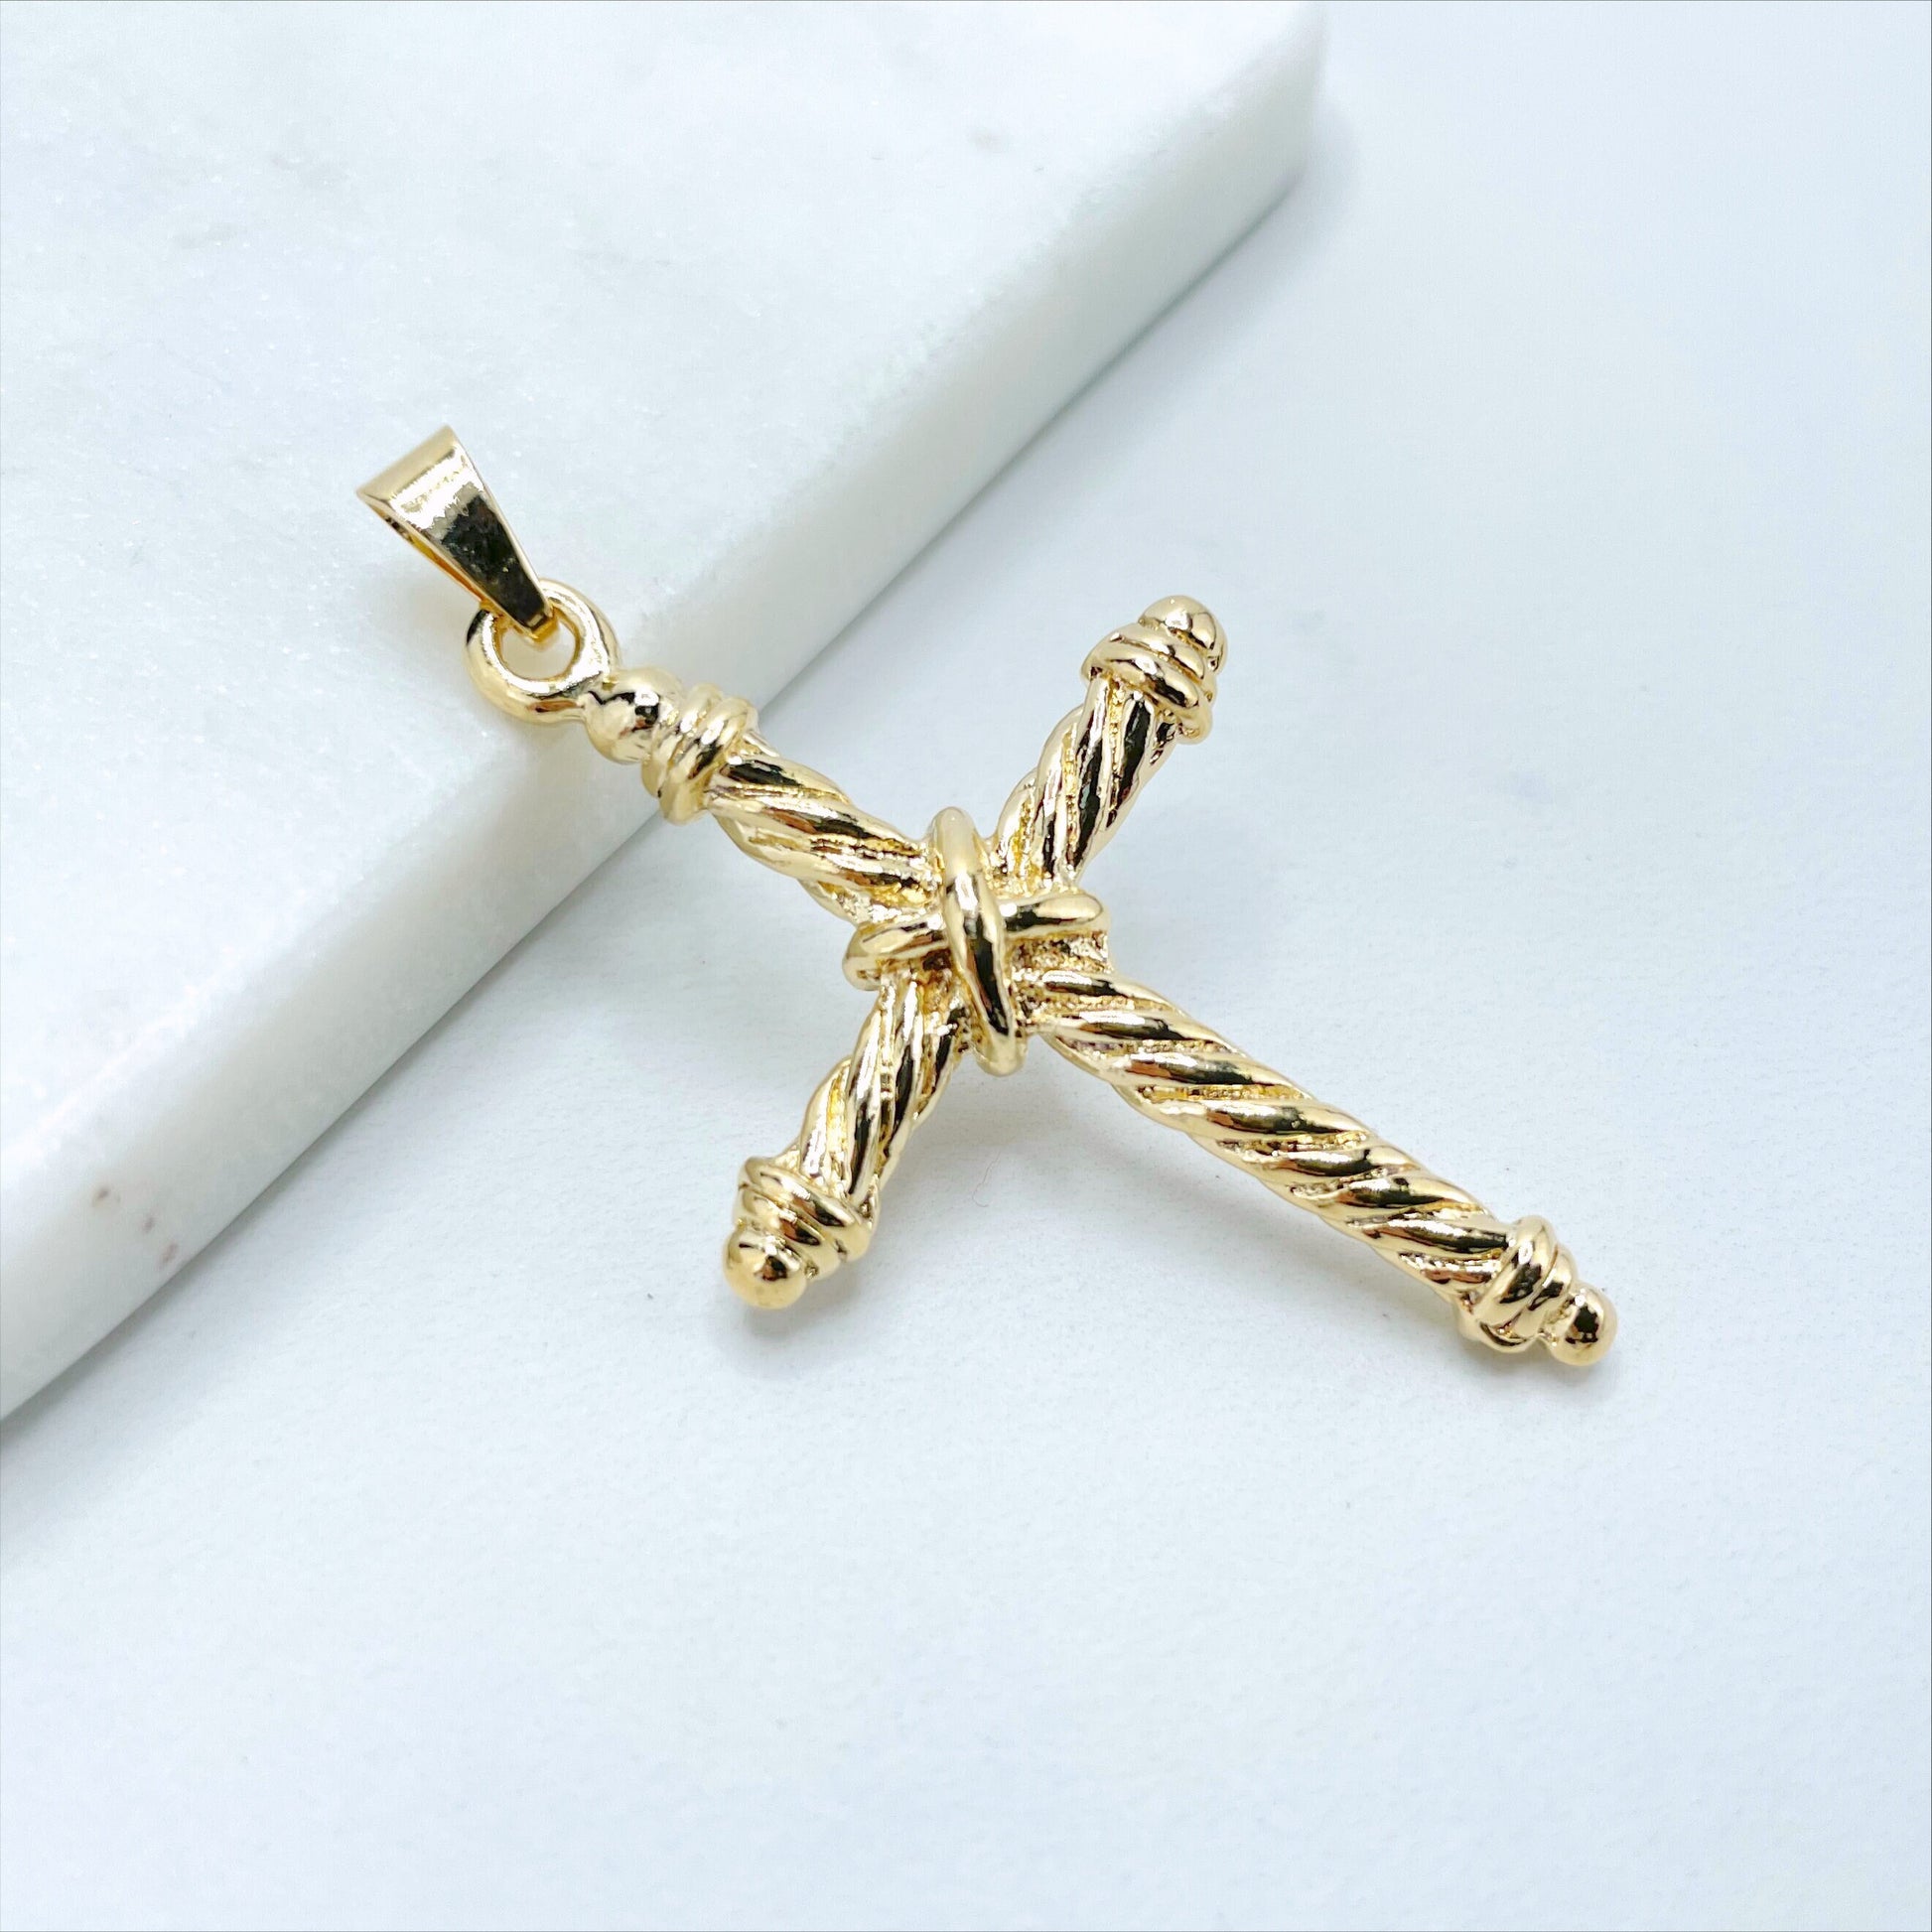 18k Gold Filled Textured Braid Rope Cross Charms Pendant, Religious Jewelry, Wholesale Jewelry Making Supplies